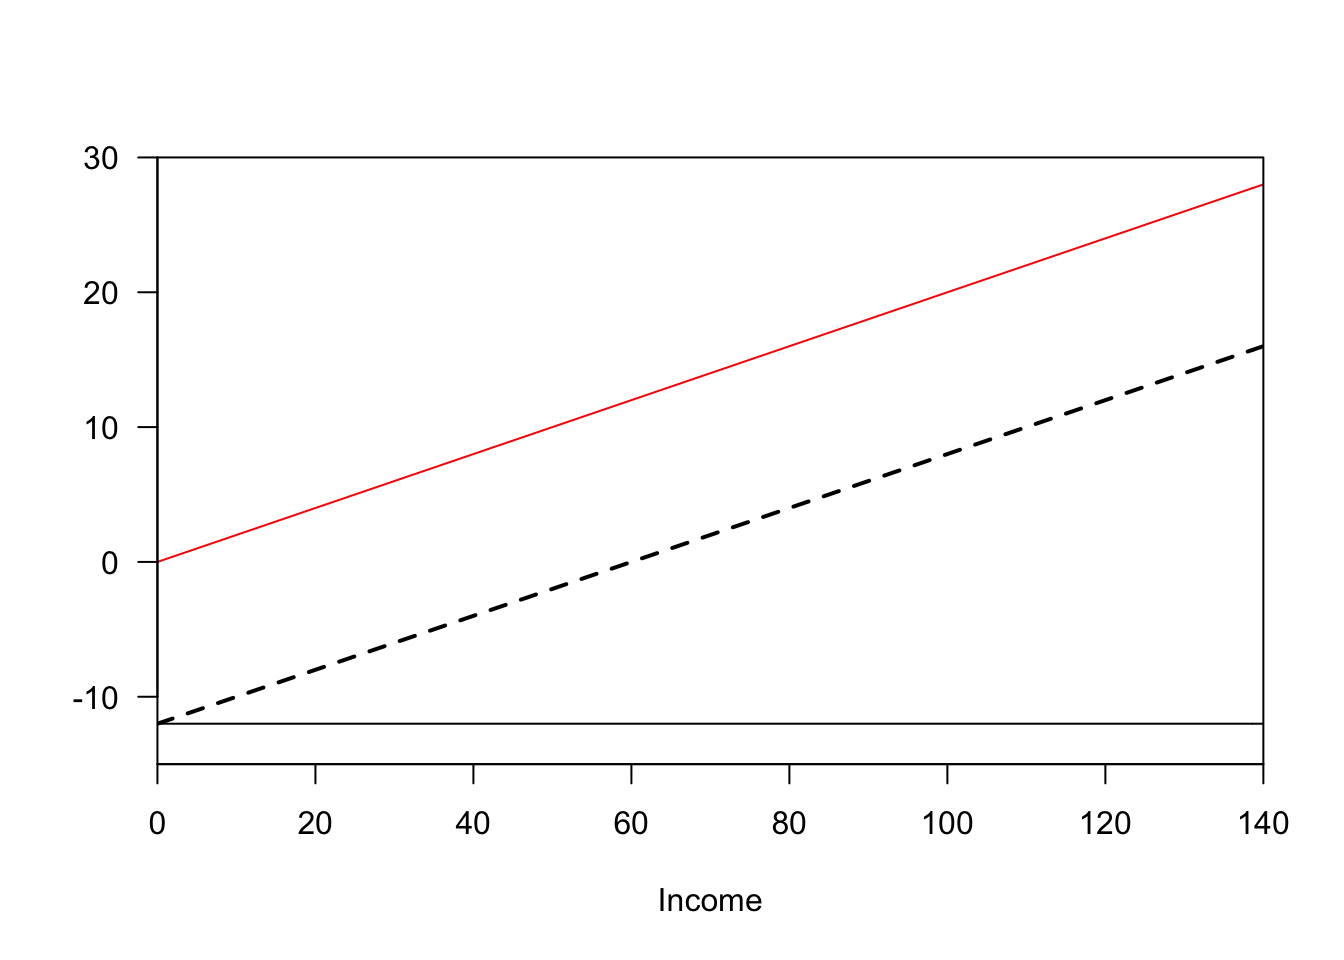 Two proposed policies. Taxes paid in red, benefits received in black. The policy on the left has universal benefits funded by a flat tax, while the one on the right has progressive taxes and benefits. However, the combined effect of the two policies (dashed lines) is identical.